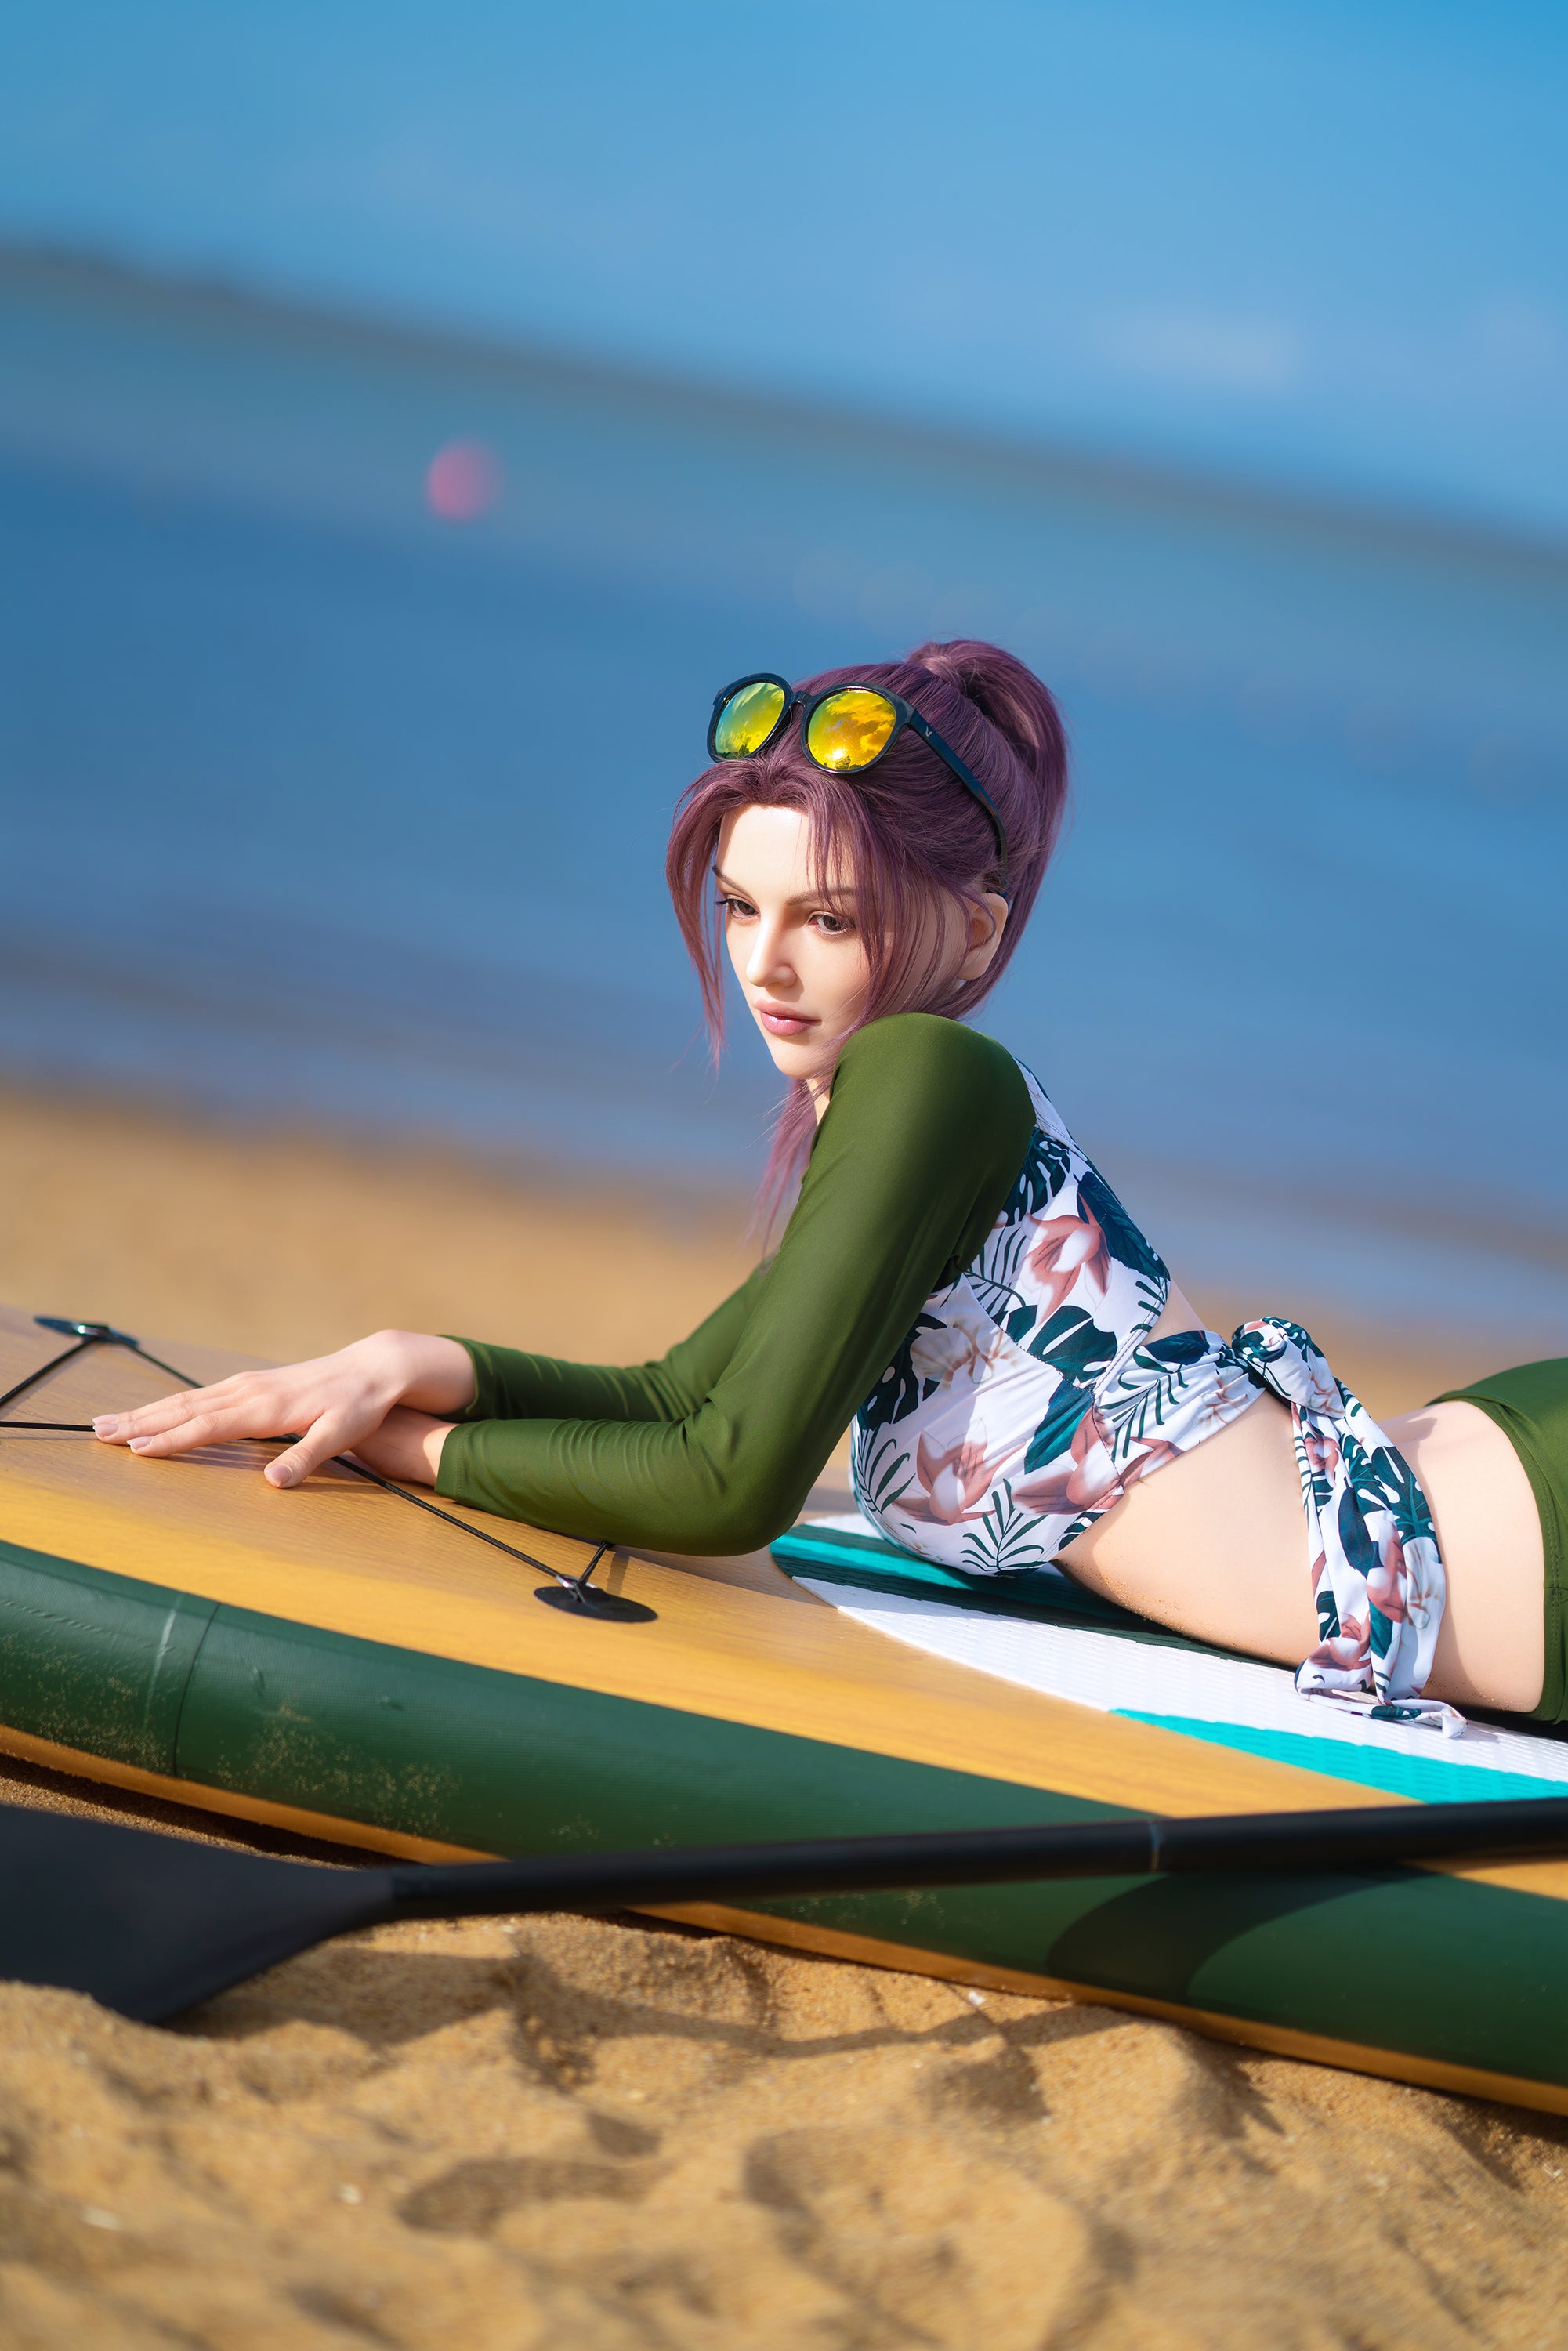 Zelex Doll 170 cm C Silicone - Marina | Buy Sex Dolls at DOLLS ACTUALLY